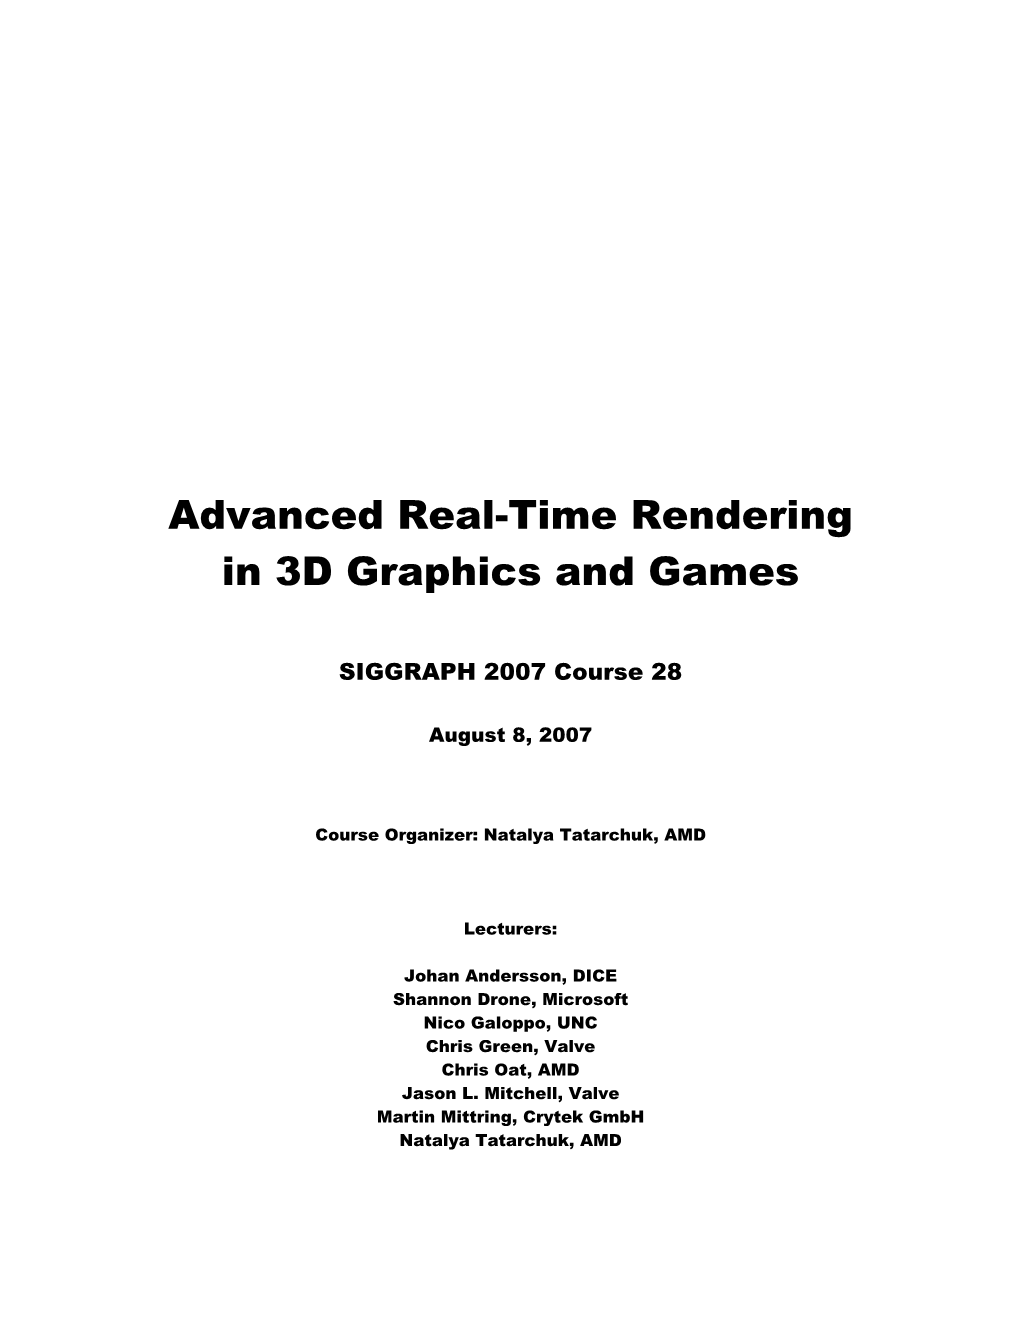 Advanced Real-Time Rendering in 3D Graphics and Games